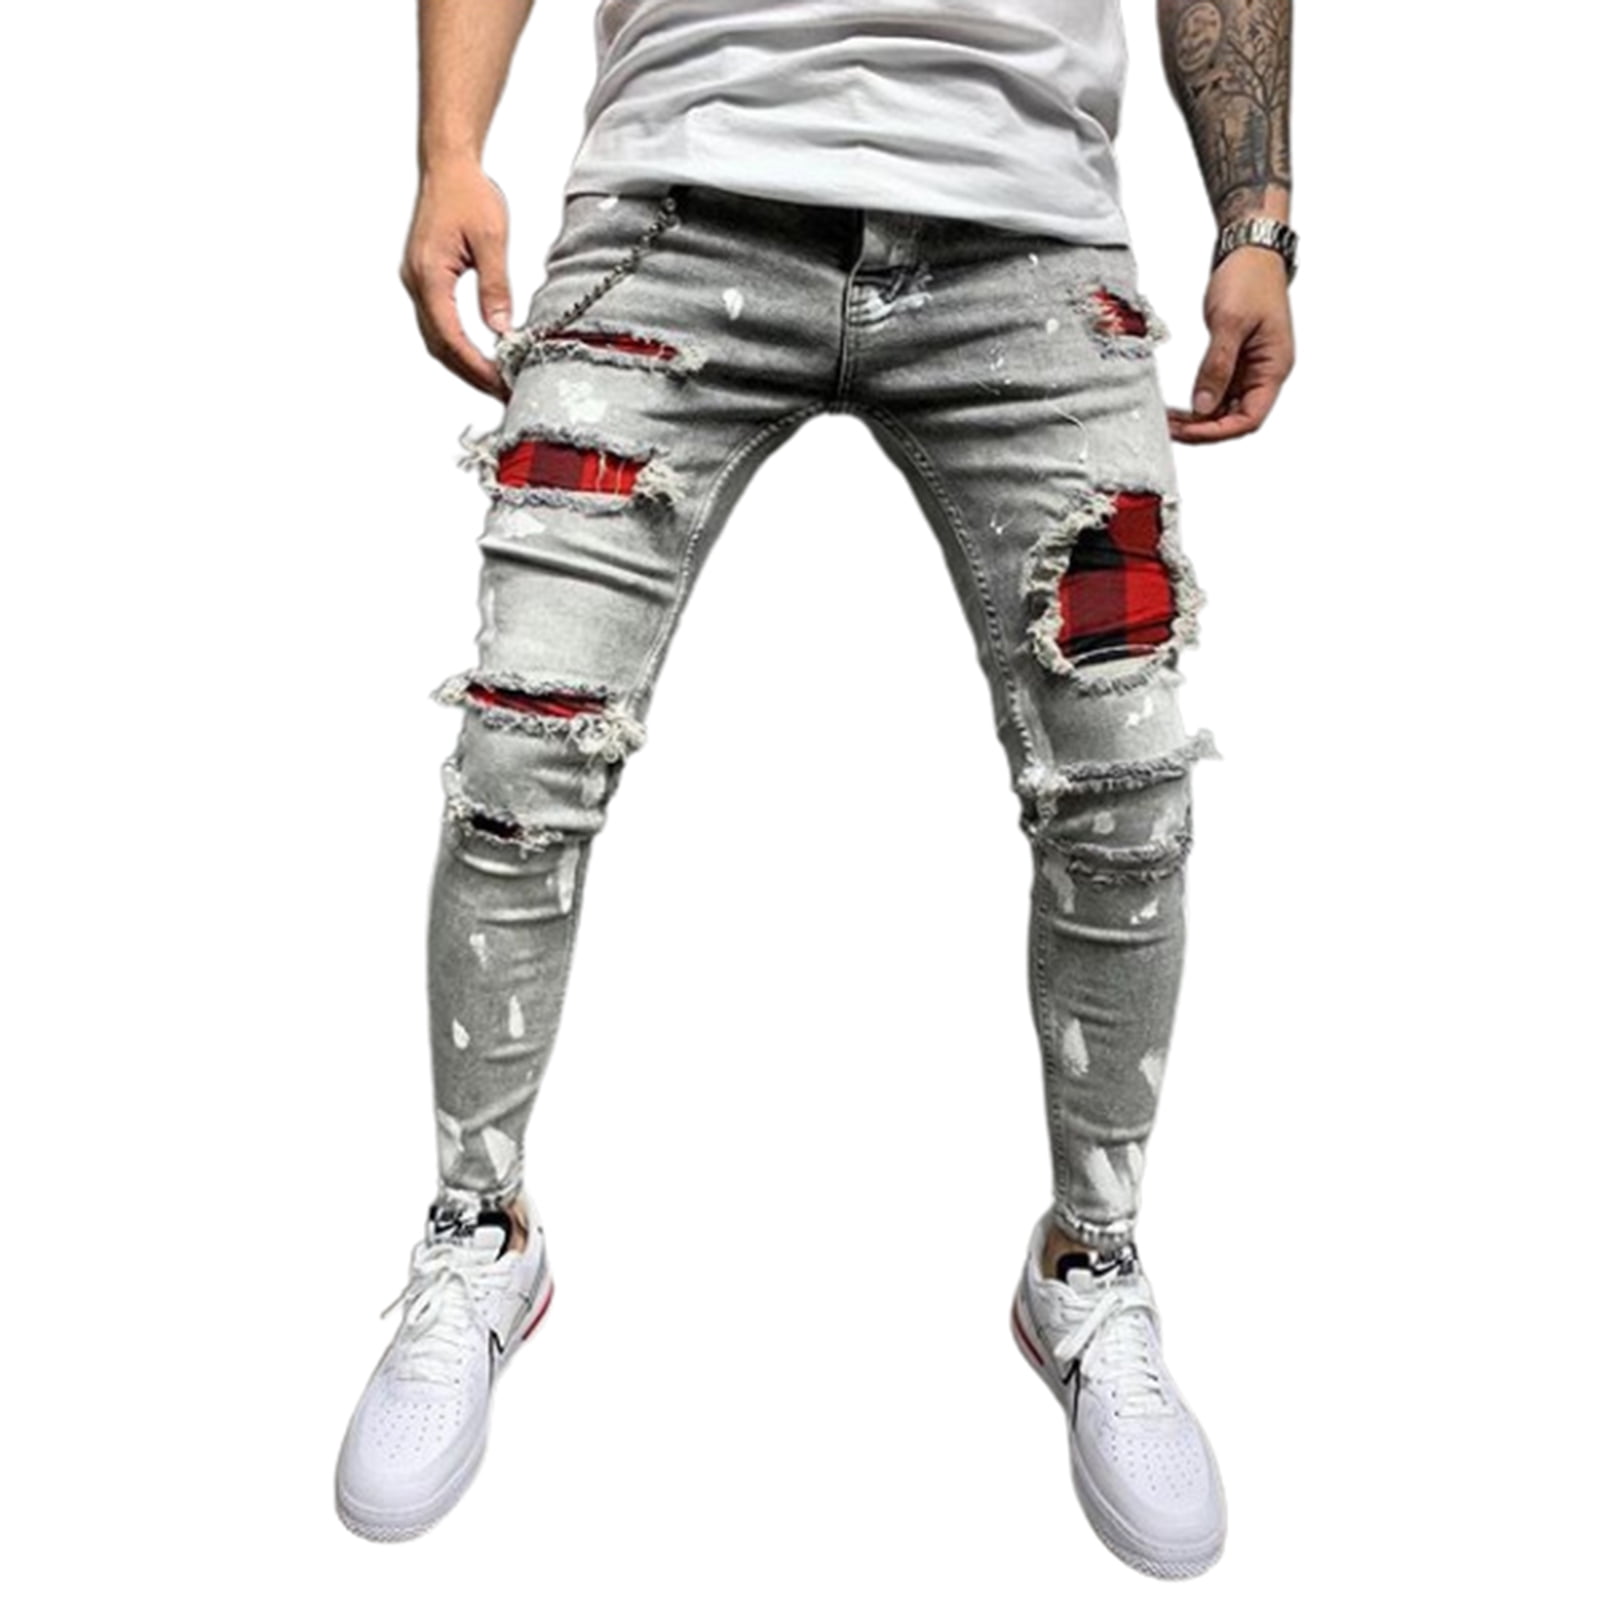 Allonly Womens Destroyed Skinny Fit Stretch Wrinkle Design Patchwork Ripped Biker Jeans Pencil Pants with Zippers